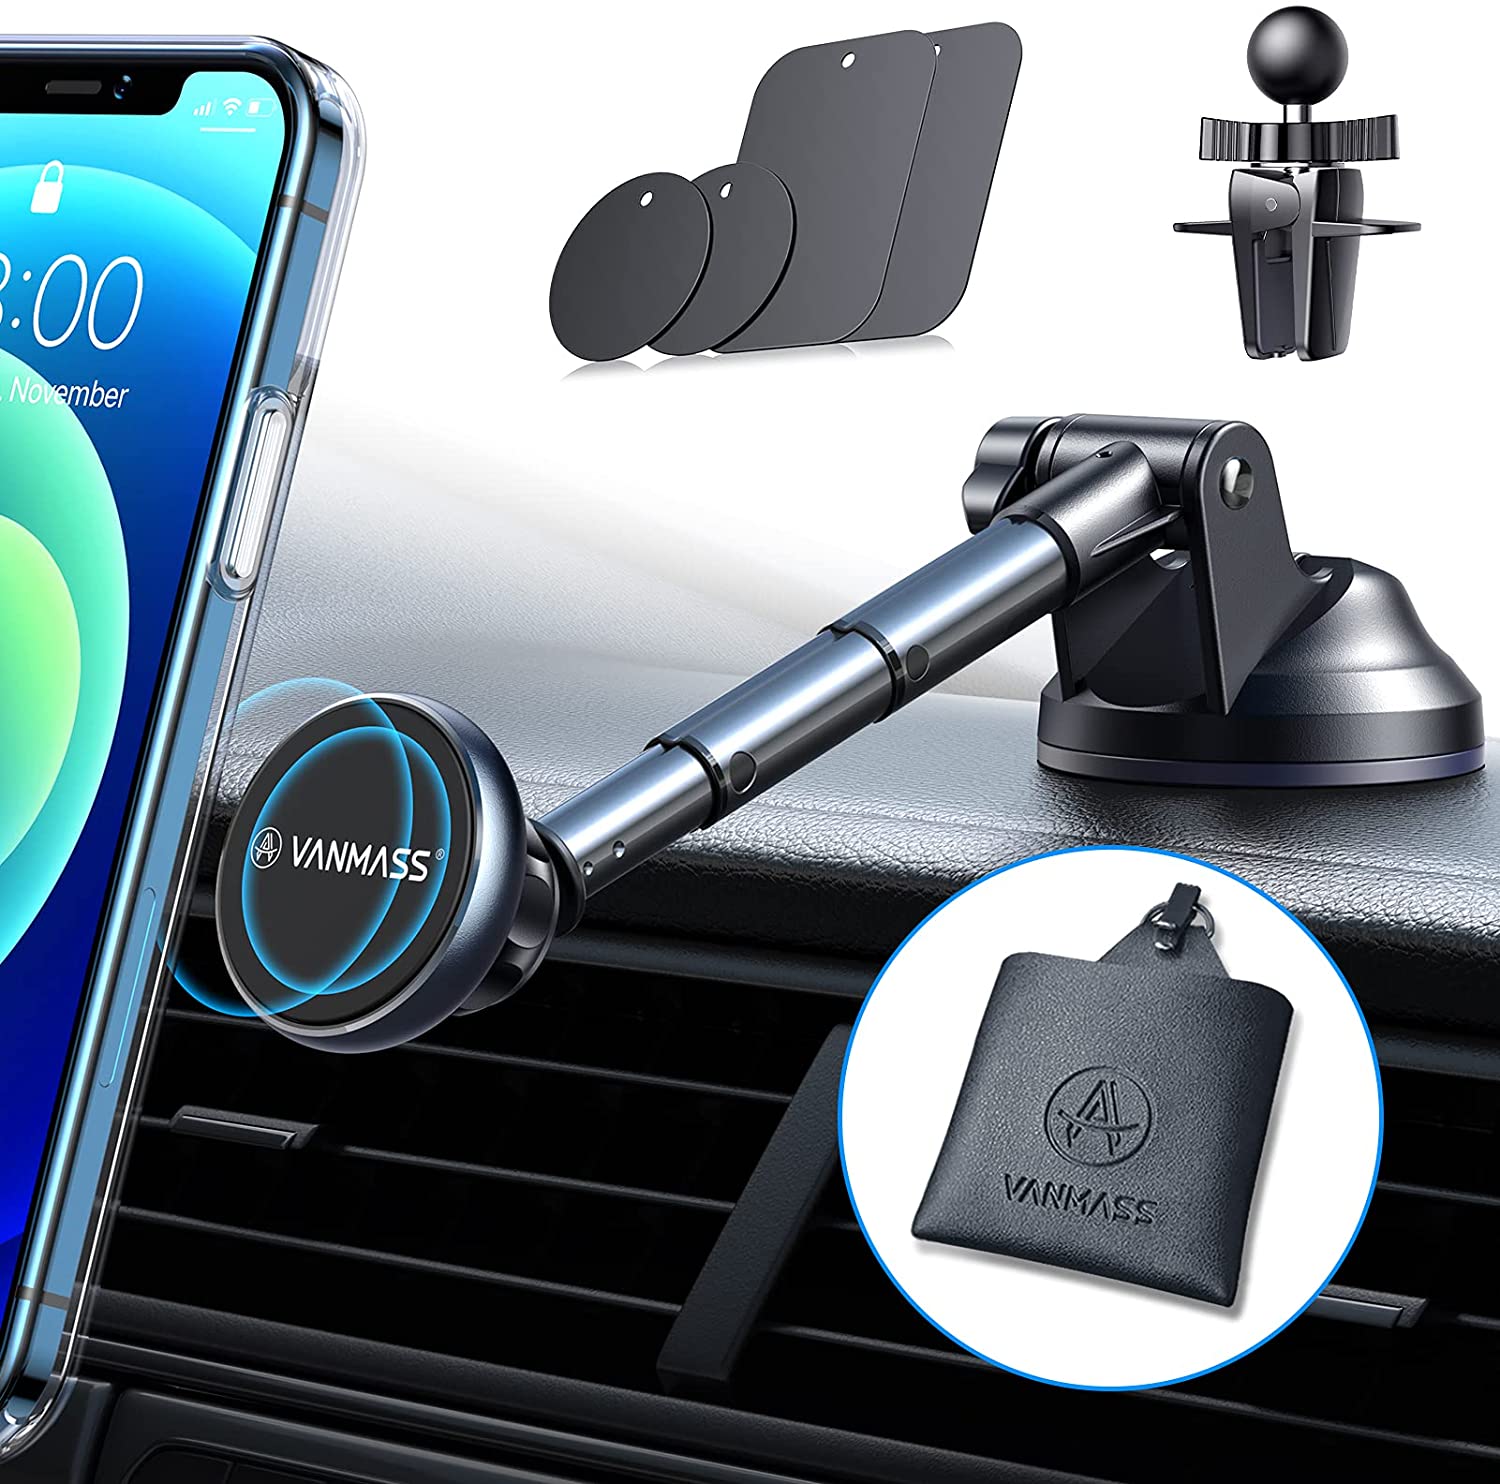 Super Sticky Suction Cup Phone Holder for All Phone Magnetic Phone Holder for Car Dashboard with 6 Powerful Magnets Adjustable Telescopic Arm